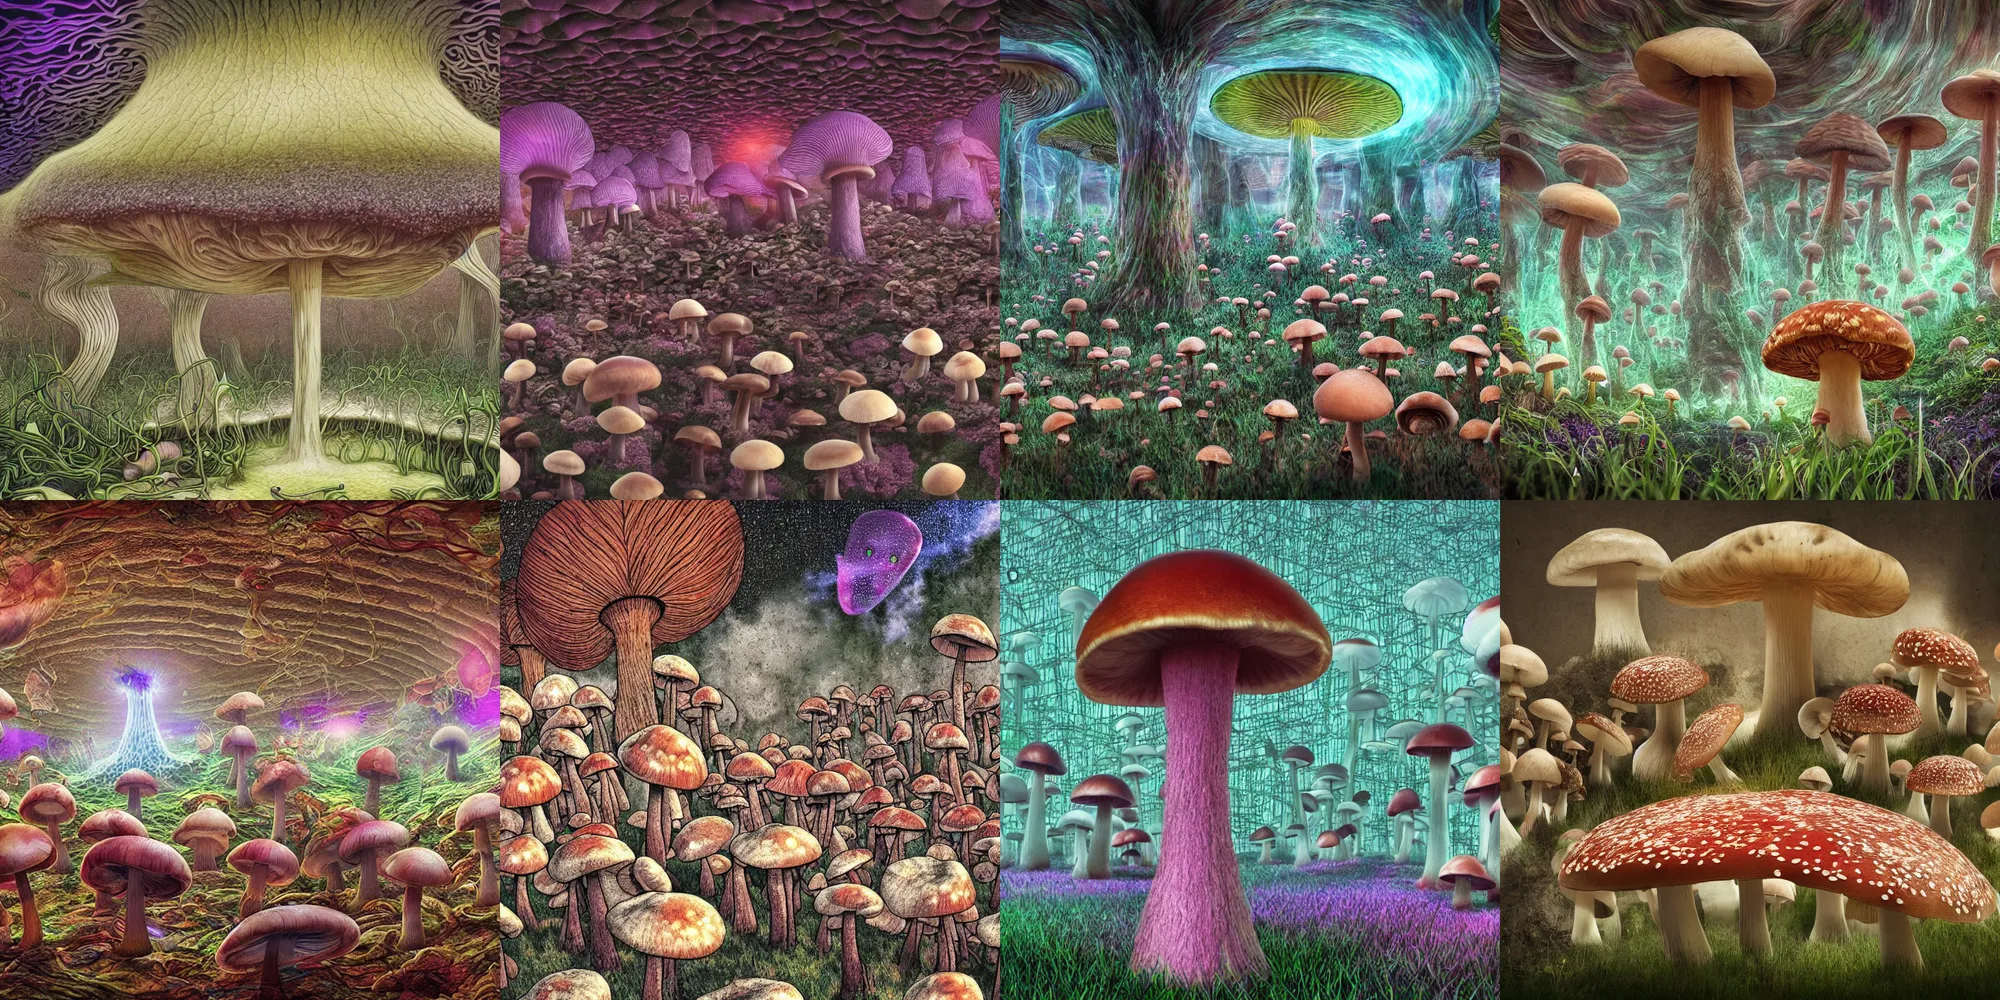 Prompt: a hyper real rendering of a mushroom trip where you perceive the fabric of the psychic prison all humans are trapped within